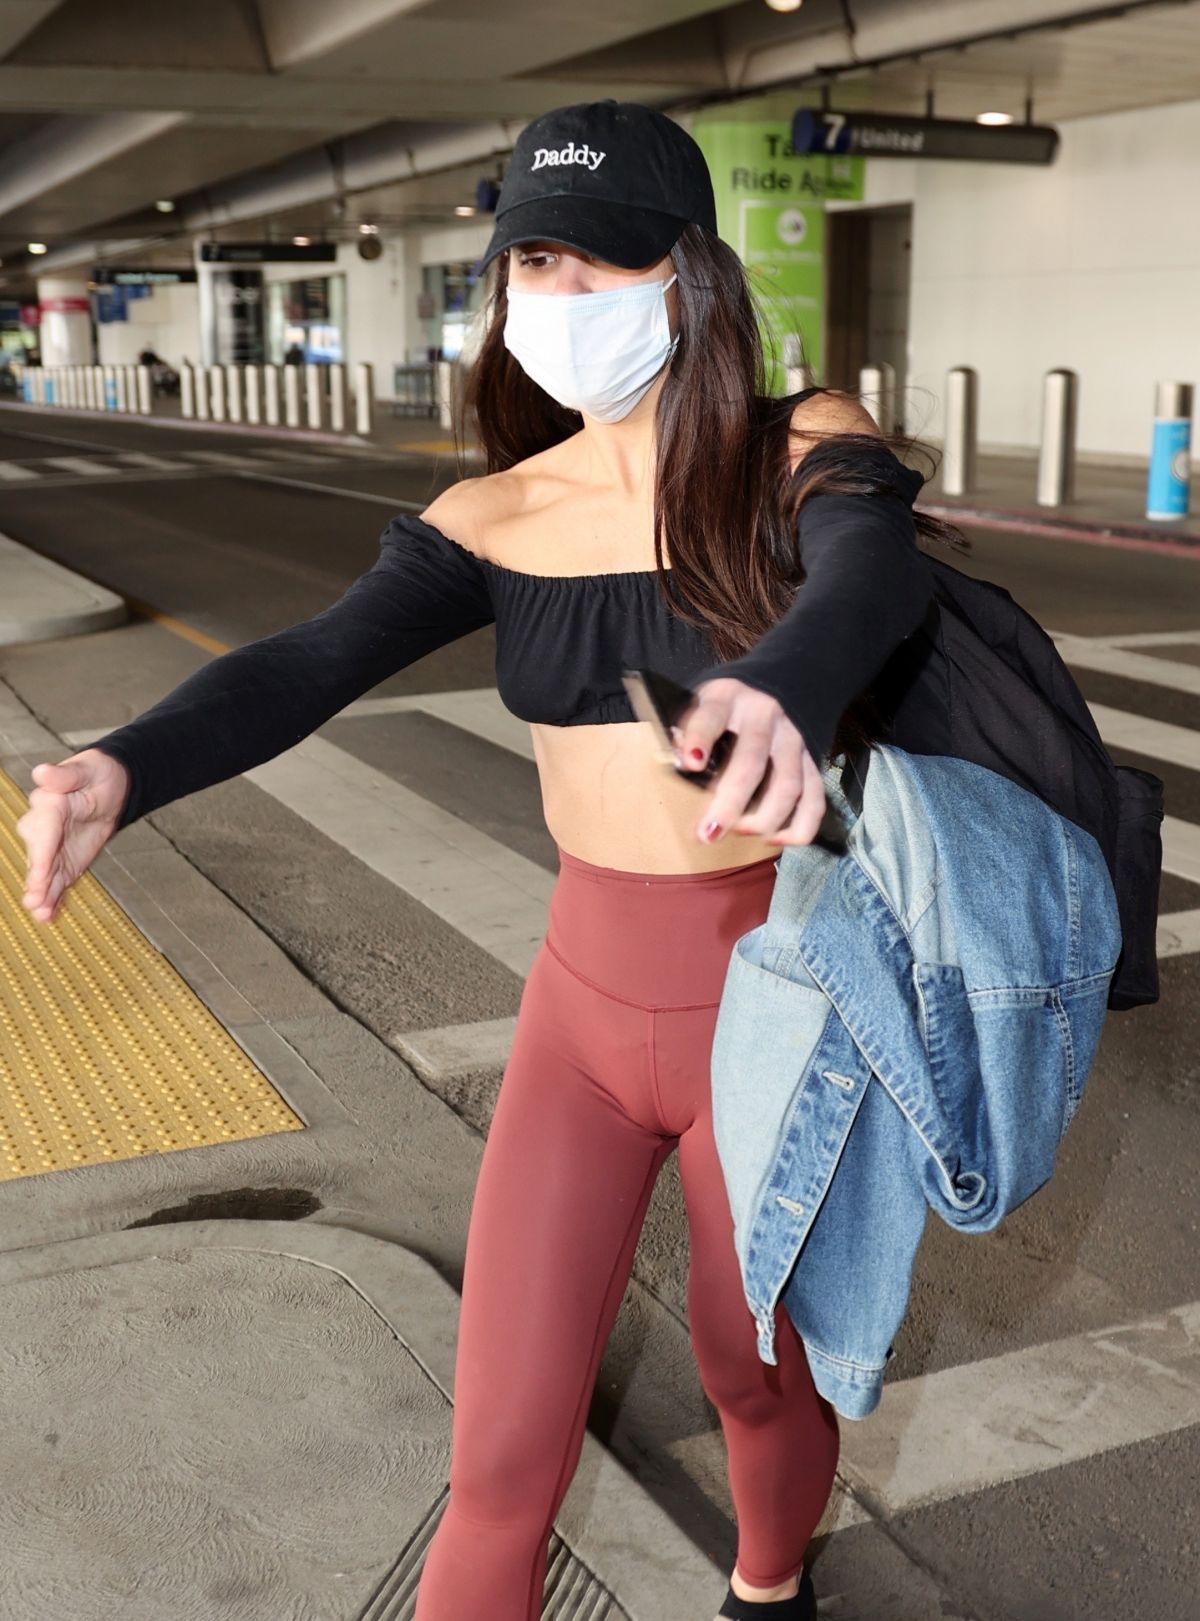 Miya Ponsetto Arrives at LAX Airport in Los Angeles 01/10 